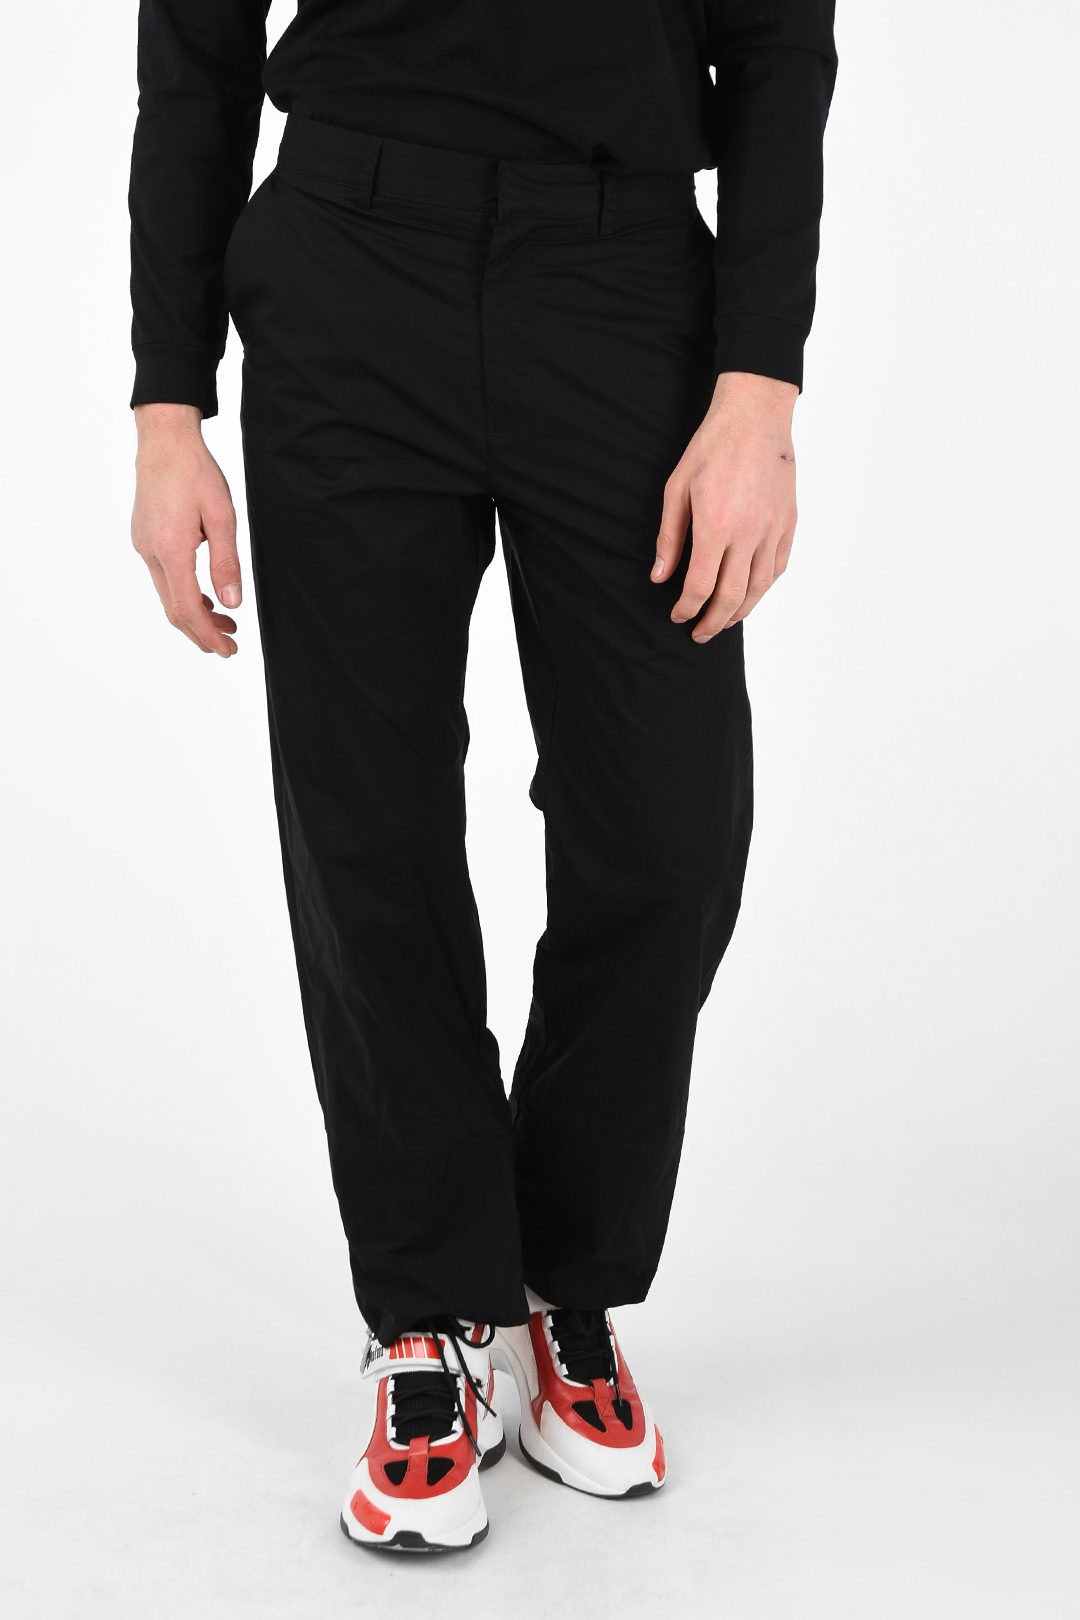 Joggers for Men: Buy Trendy Sweat Pants for Men at Low Prices